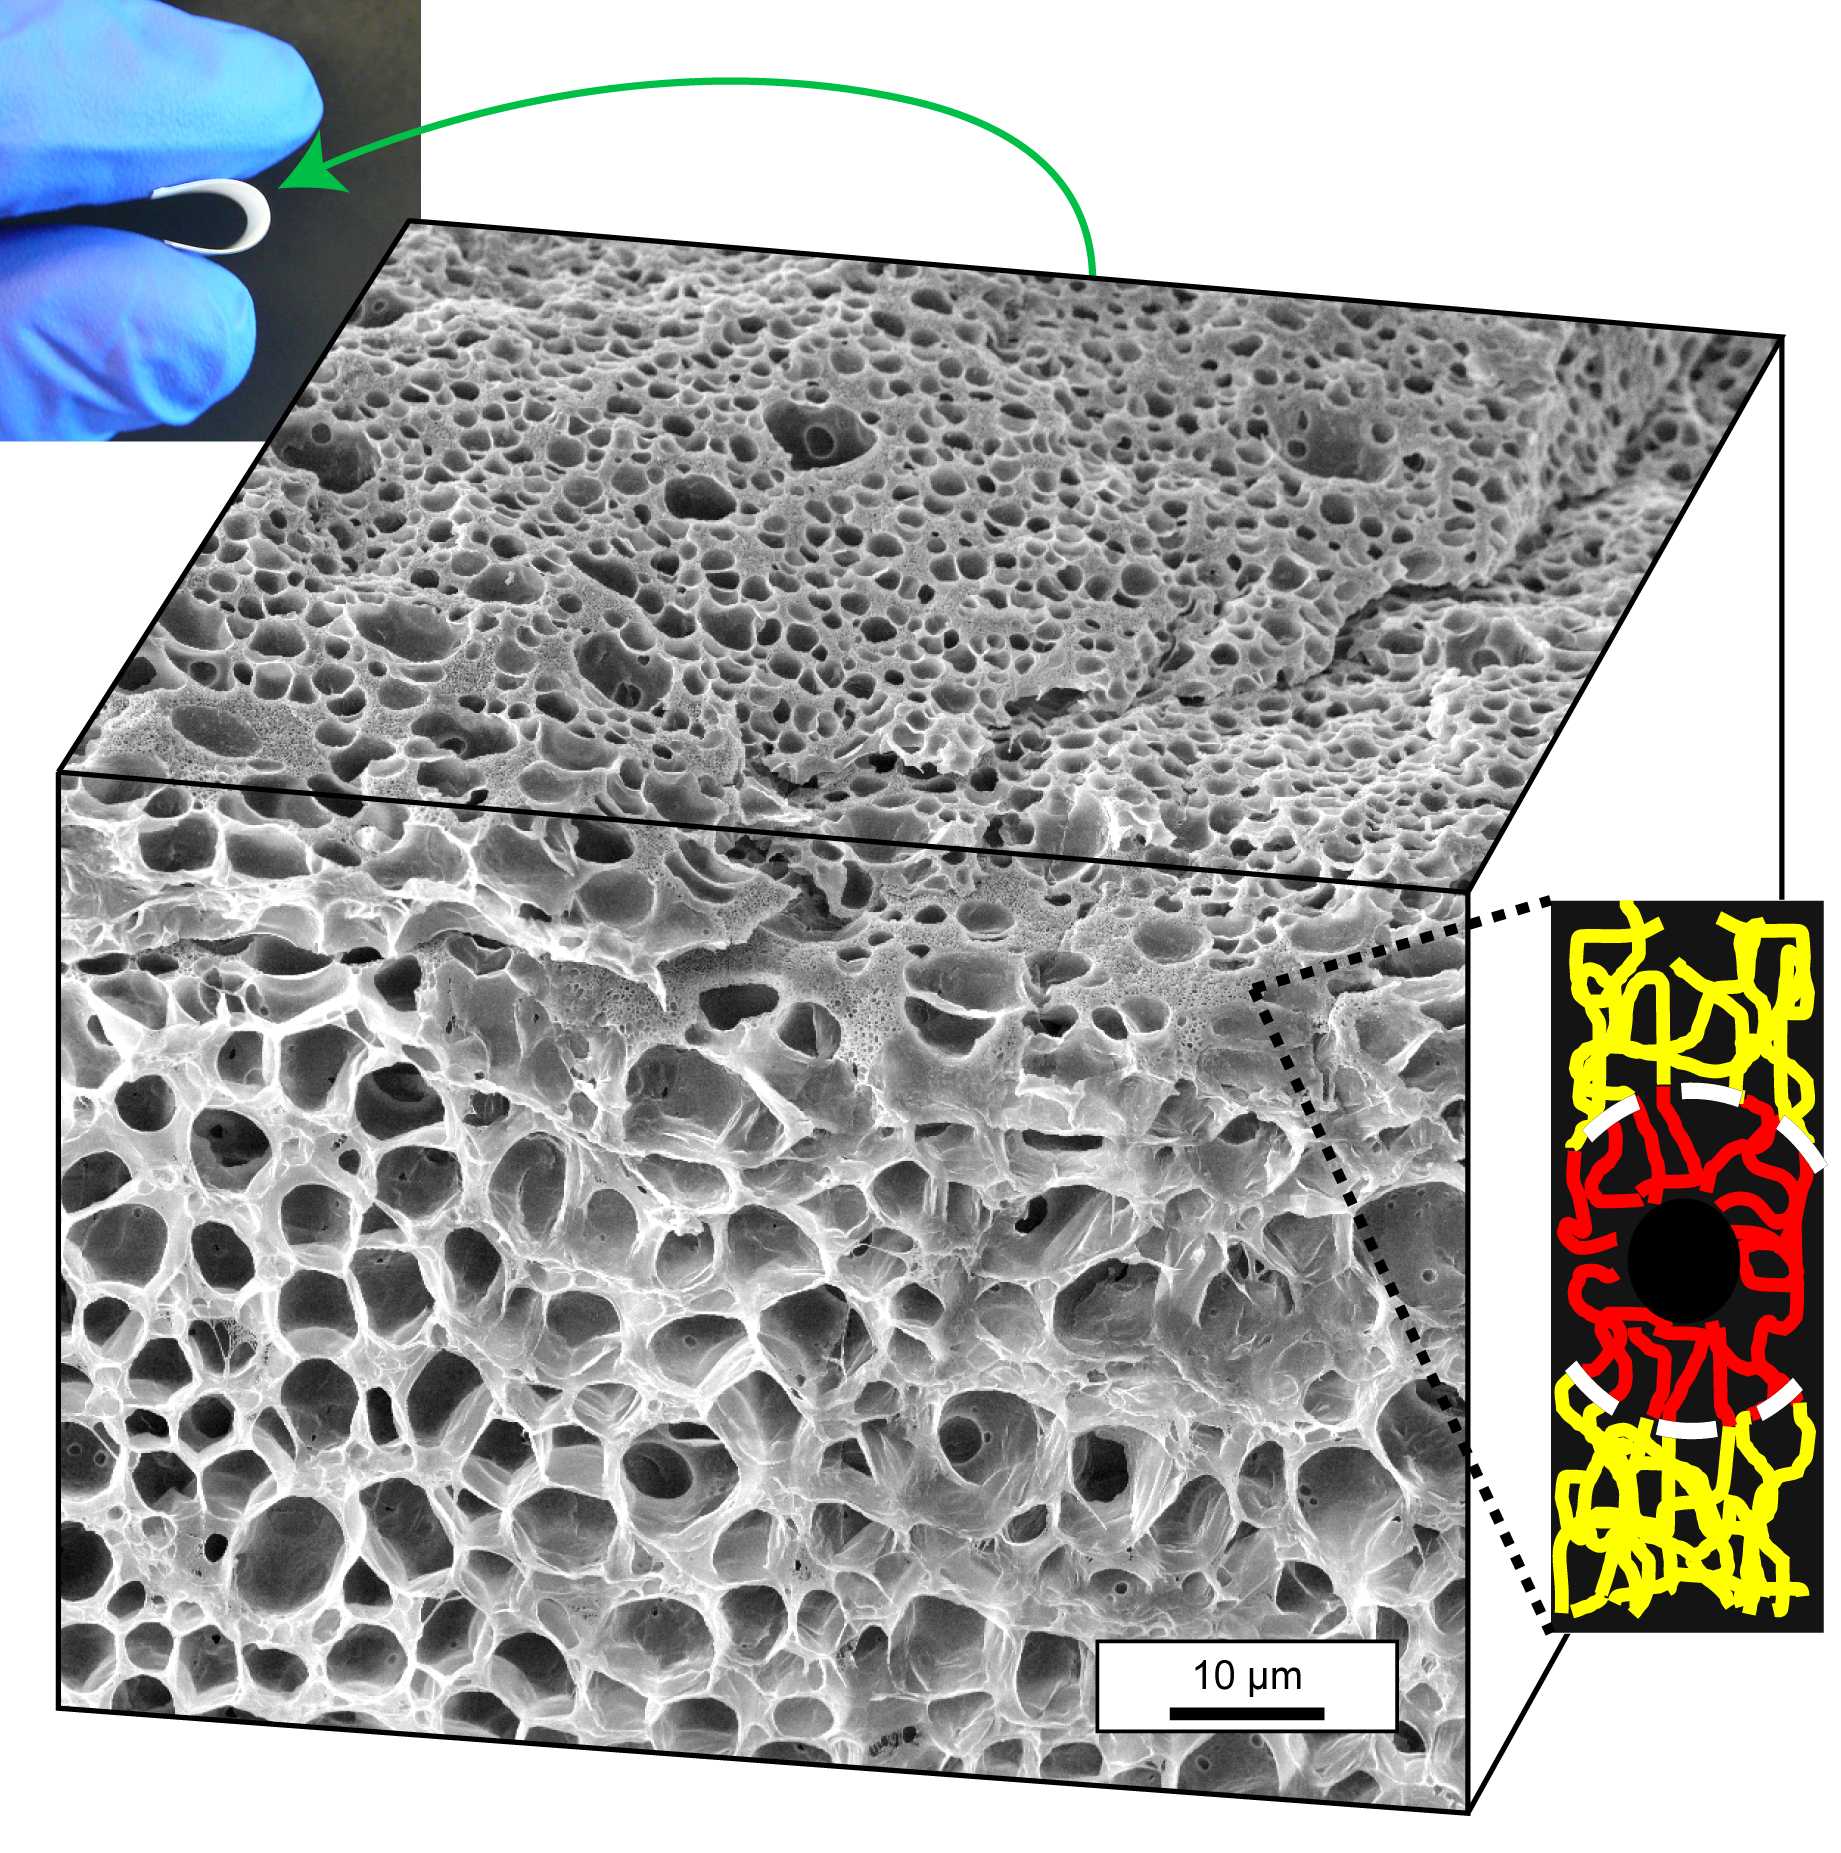 Image of Porous Polymer Film Synthesis by Wiesner Group